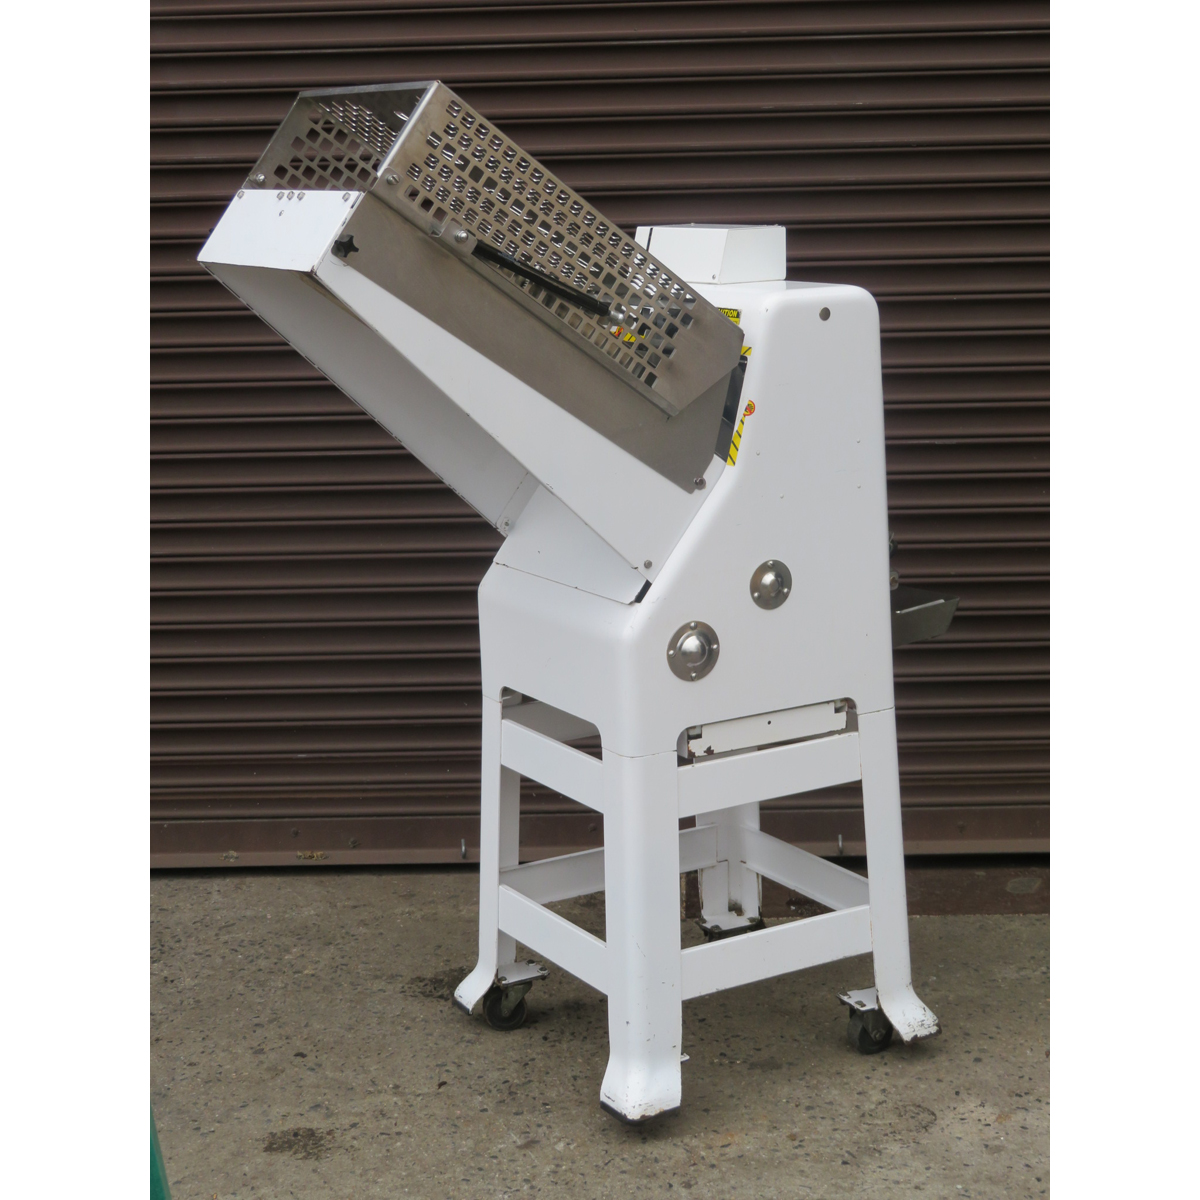 Oliver 797-32NC Bread Slicer, 1/2" Cut, New Blades, Used Excellent Condition image 1